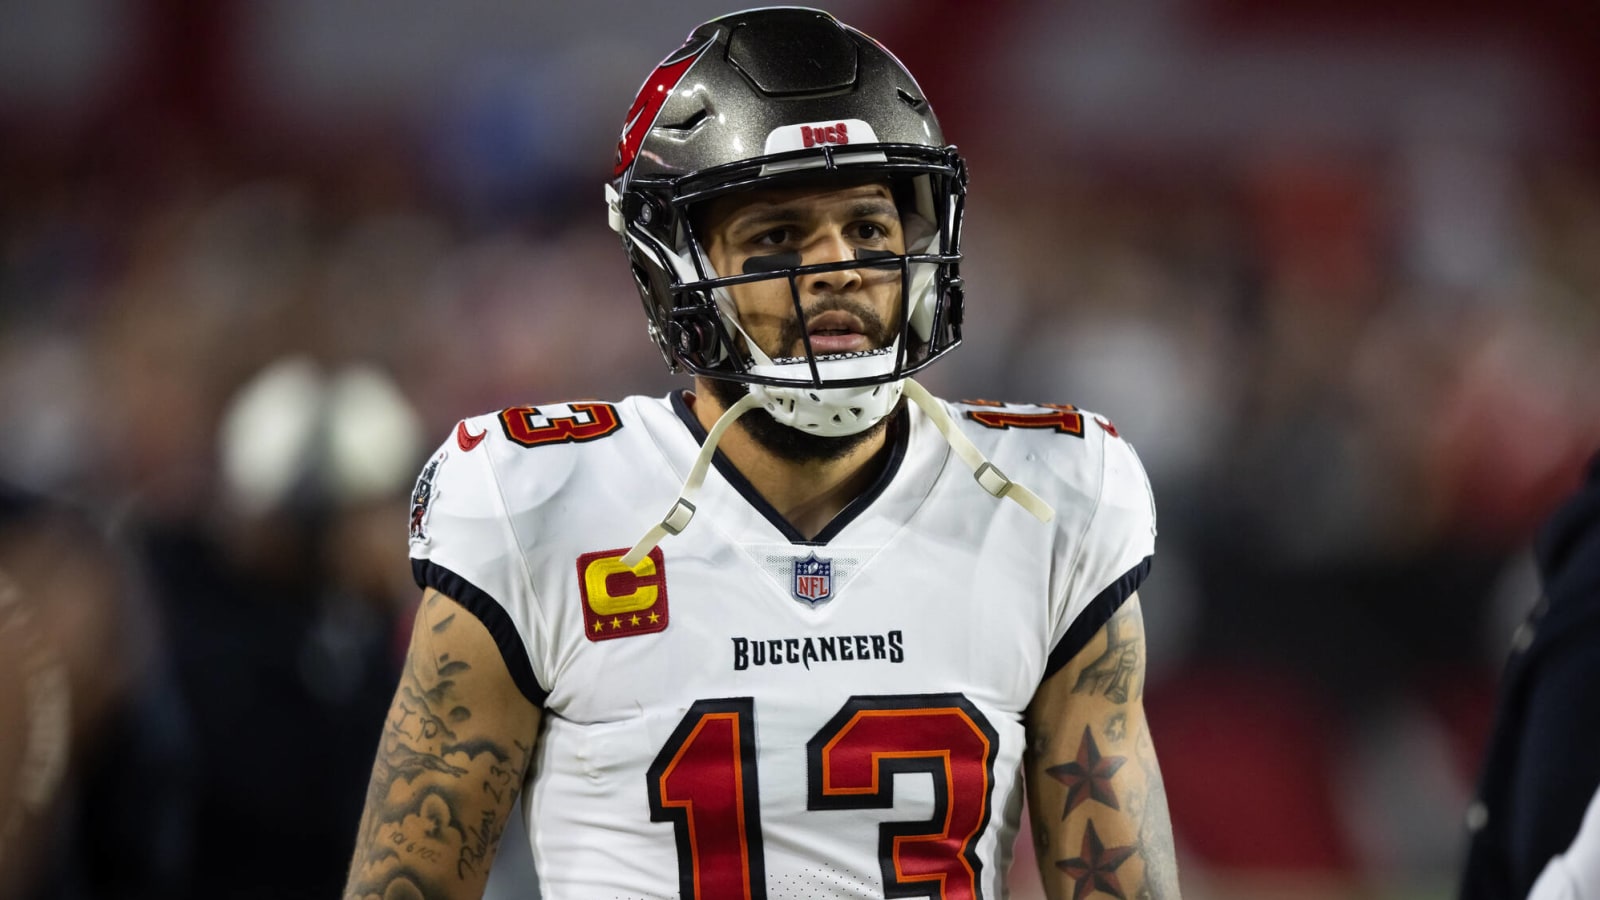 Bucs WR Mike Evans's potential contract receives mixed reactions